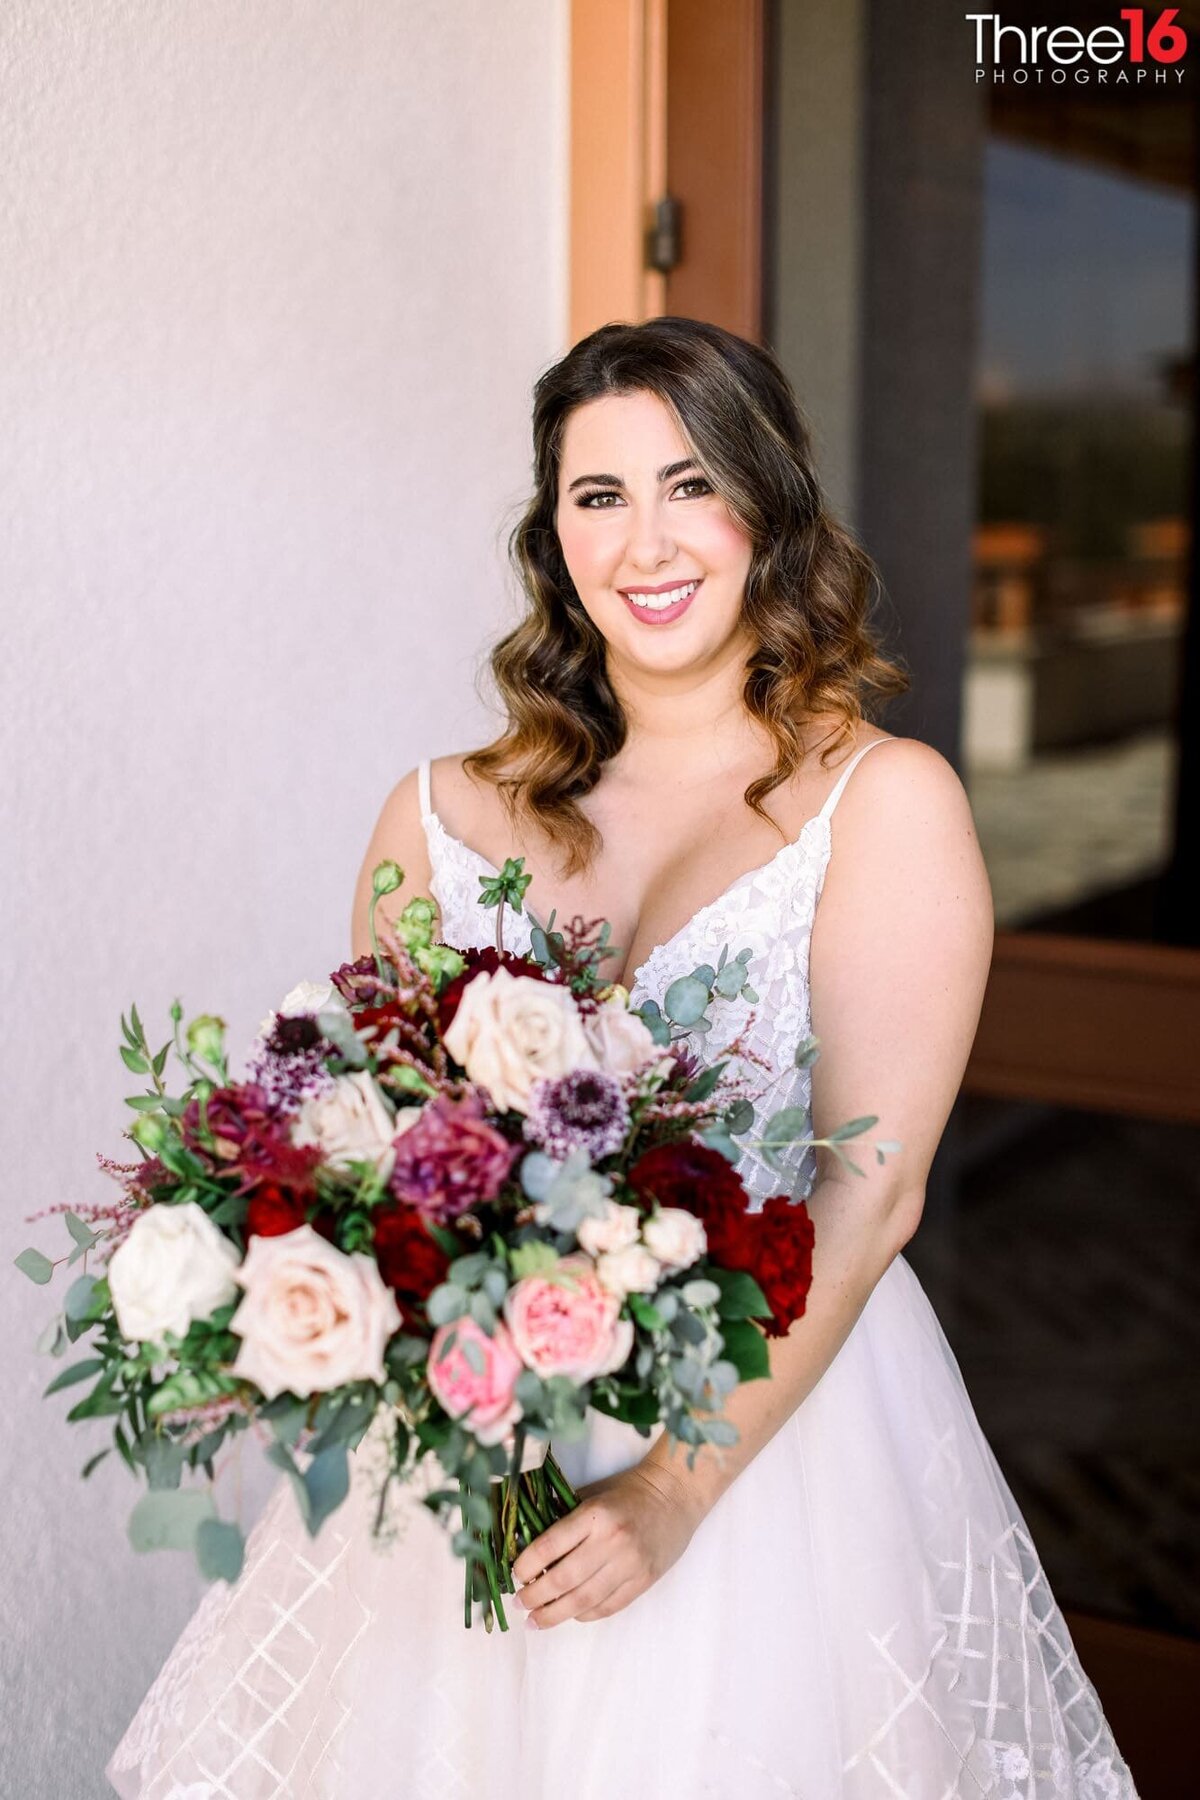 Bride poses with a big smile and a large bouquet